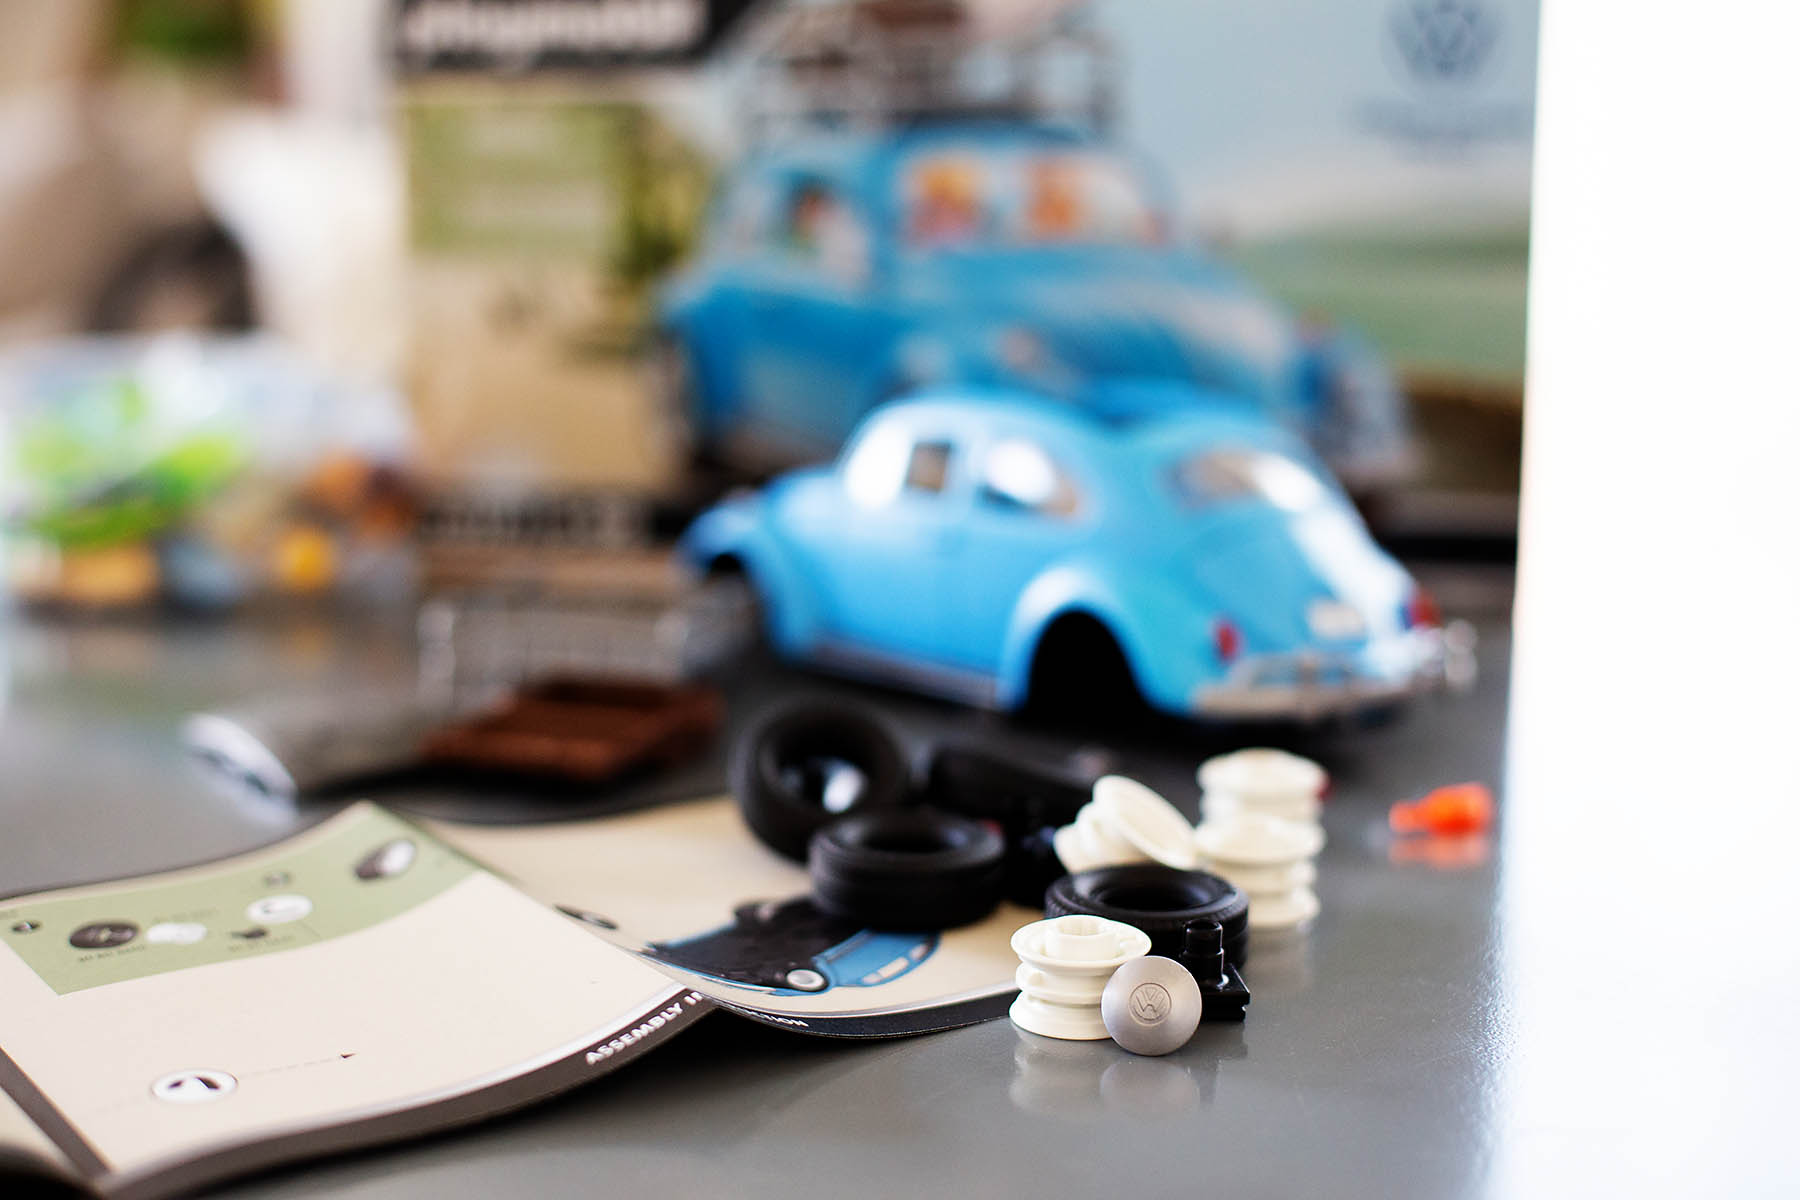 New Volkswagen Beetle and T1 Camping Bus PLAYMOBIL playsets